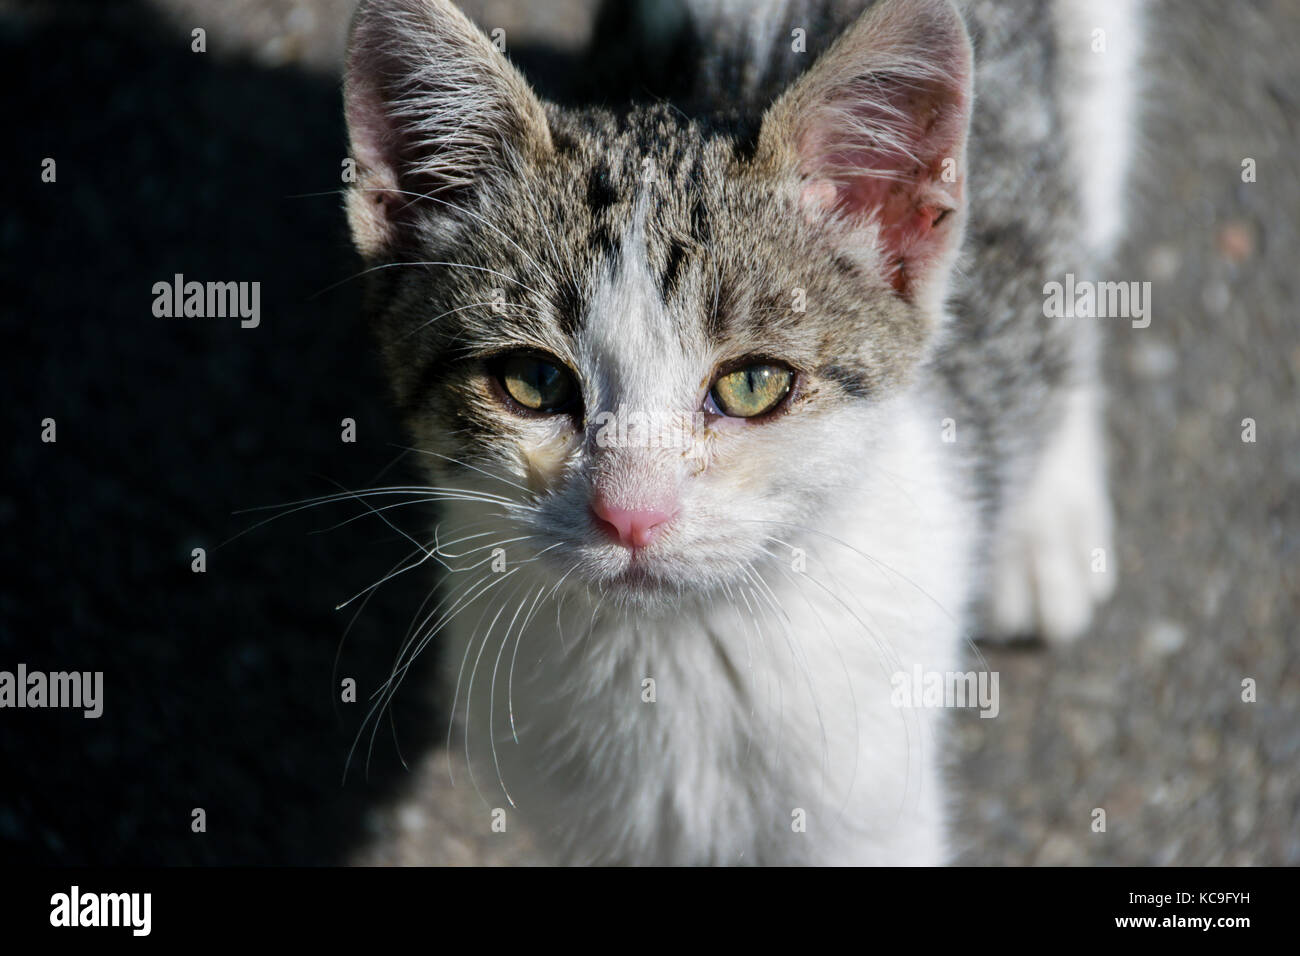 Portrait Of Friendly Mixed-Breed Kitten Looking At Camera Stock Photo